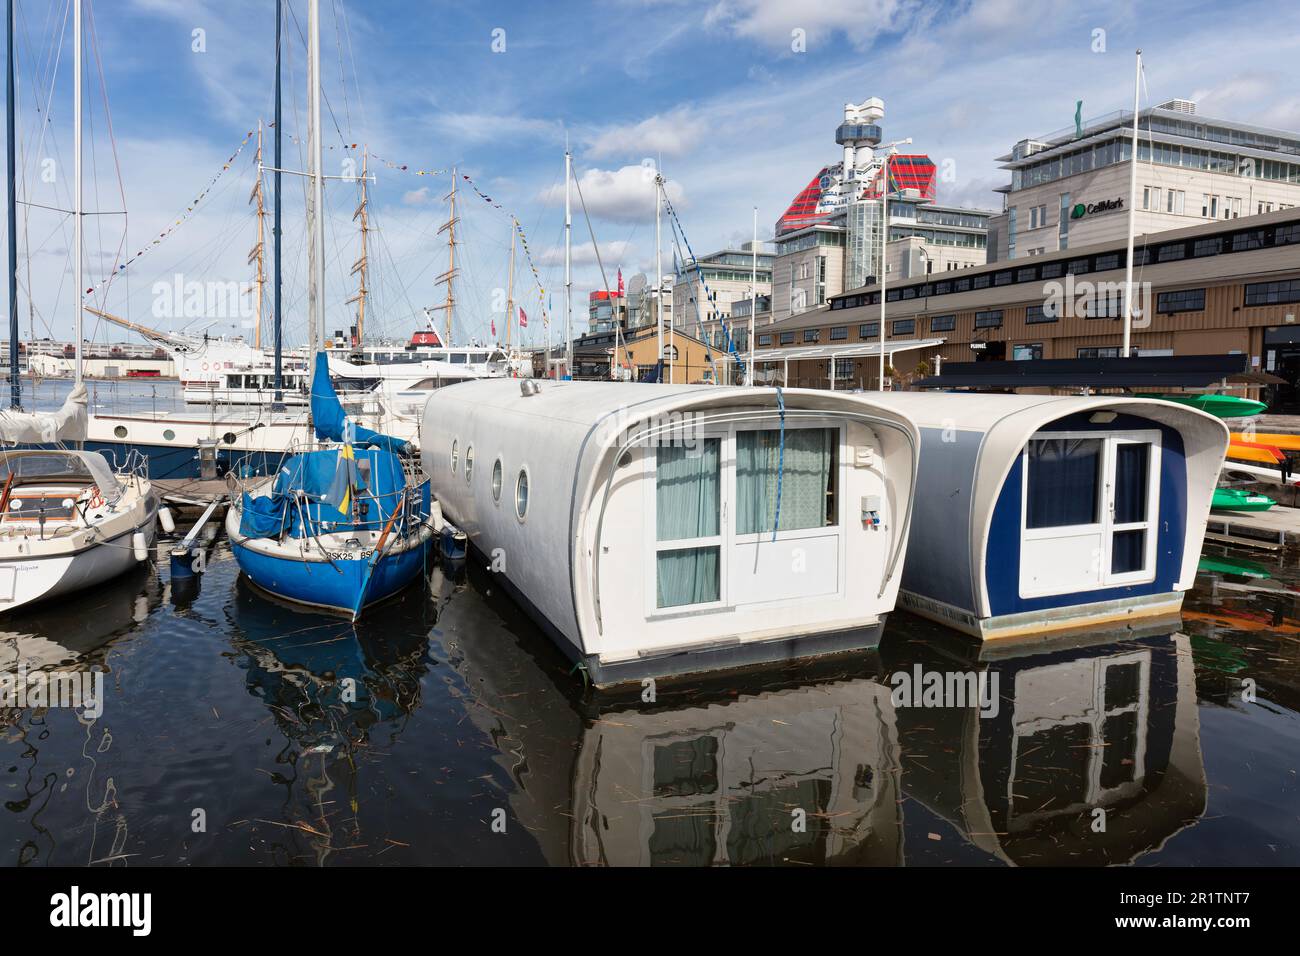 Boats and house boats moored in Lilla Bommens harbour Gothenburg 400 year anniversary 2023. Gothenburg. Stock Photo